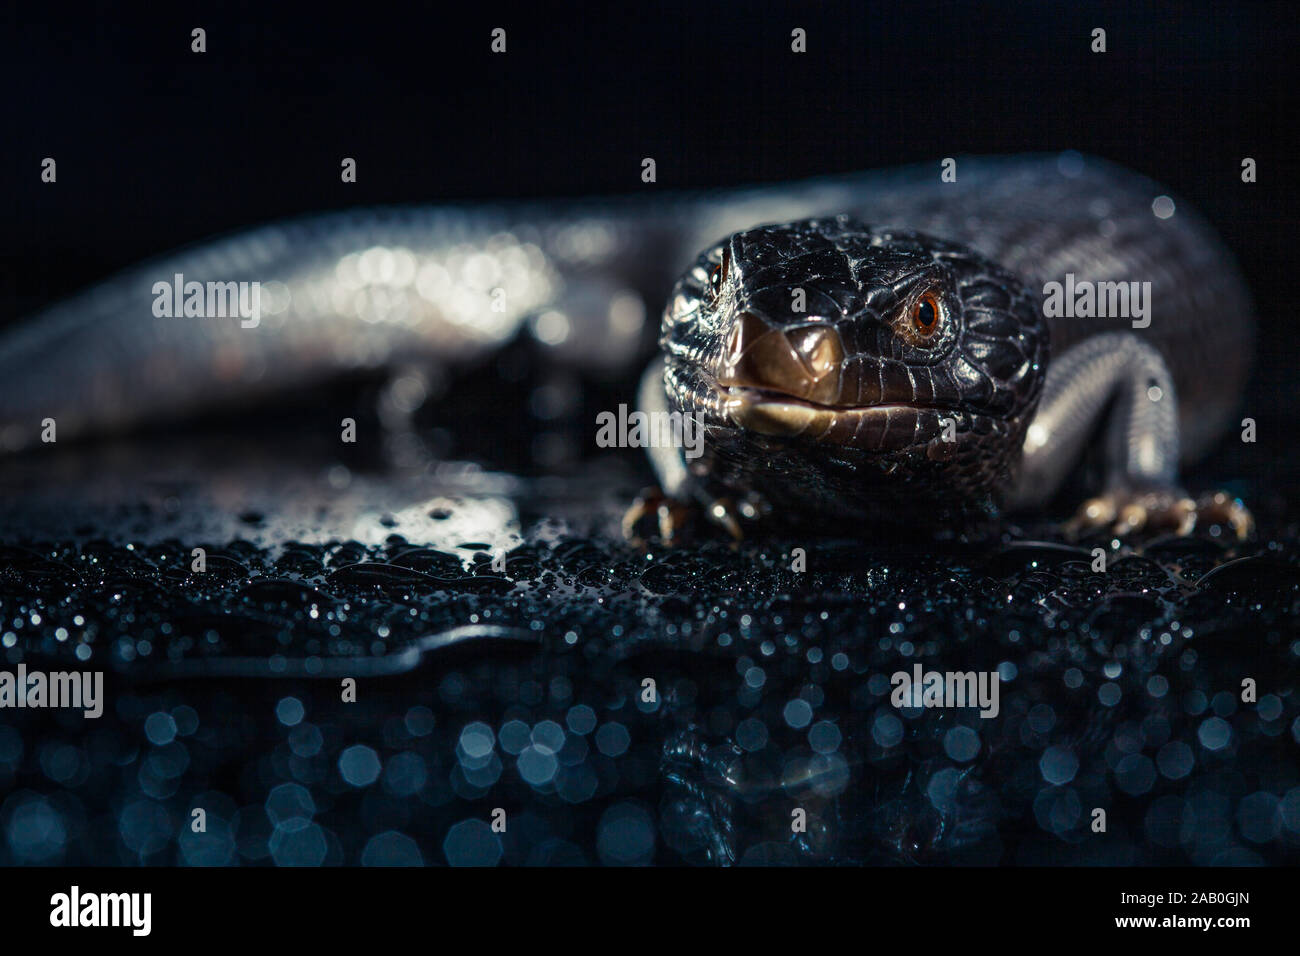 Black blue tongued lizard in wet dark shiny environement. Stock Photo